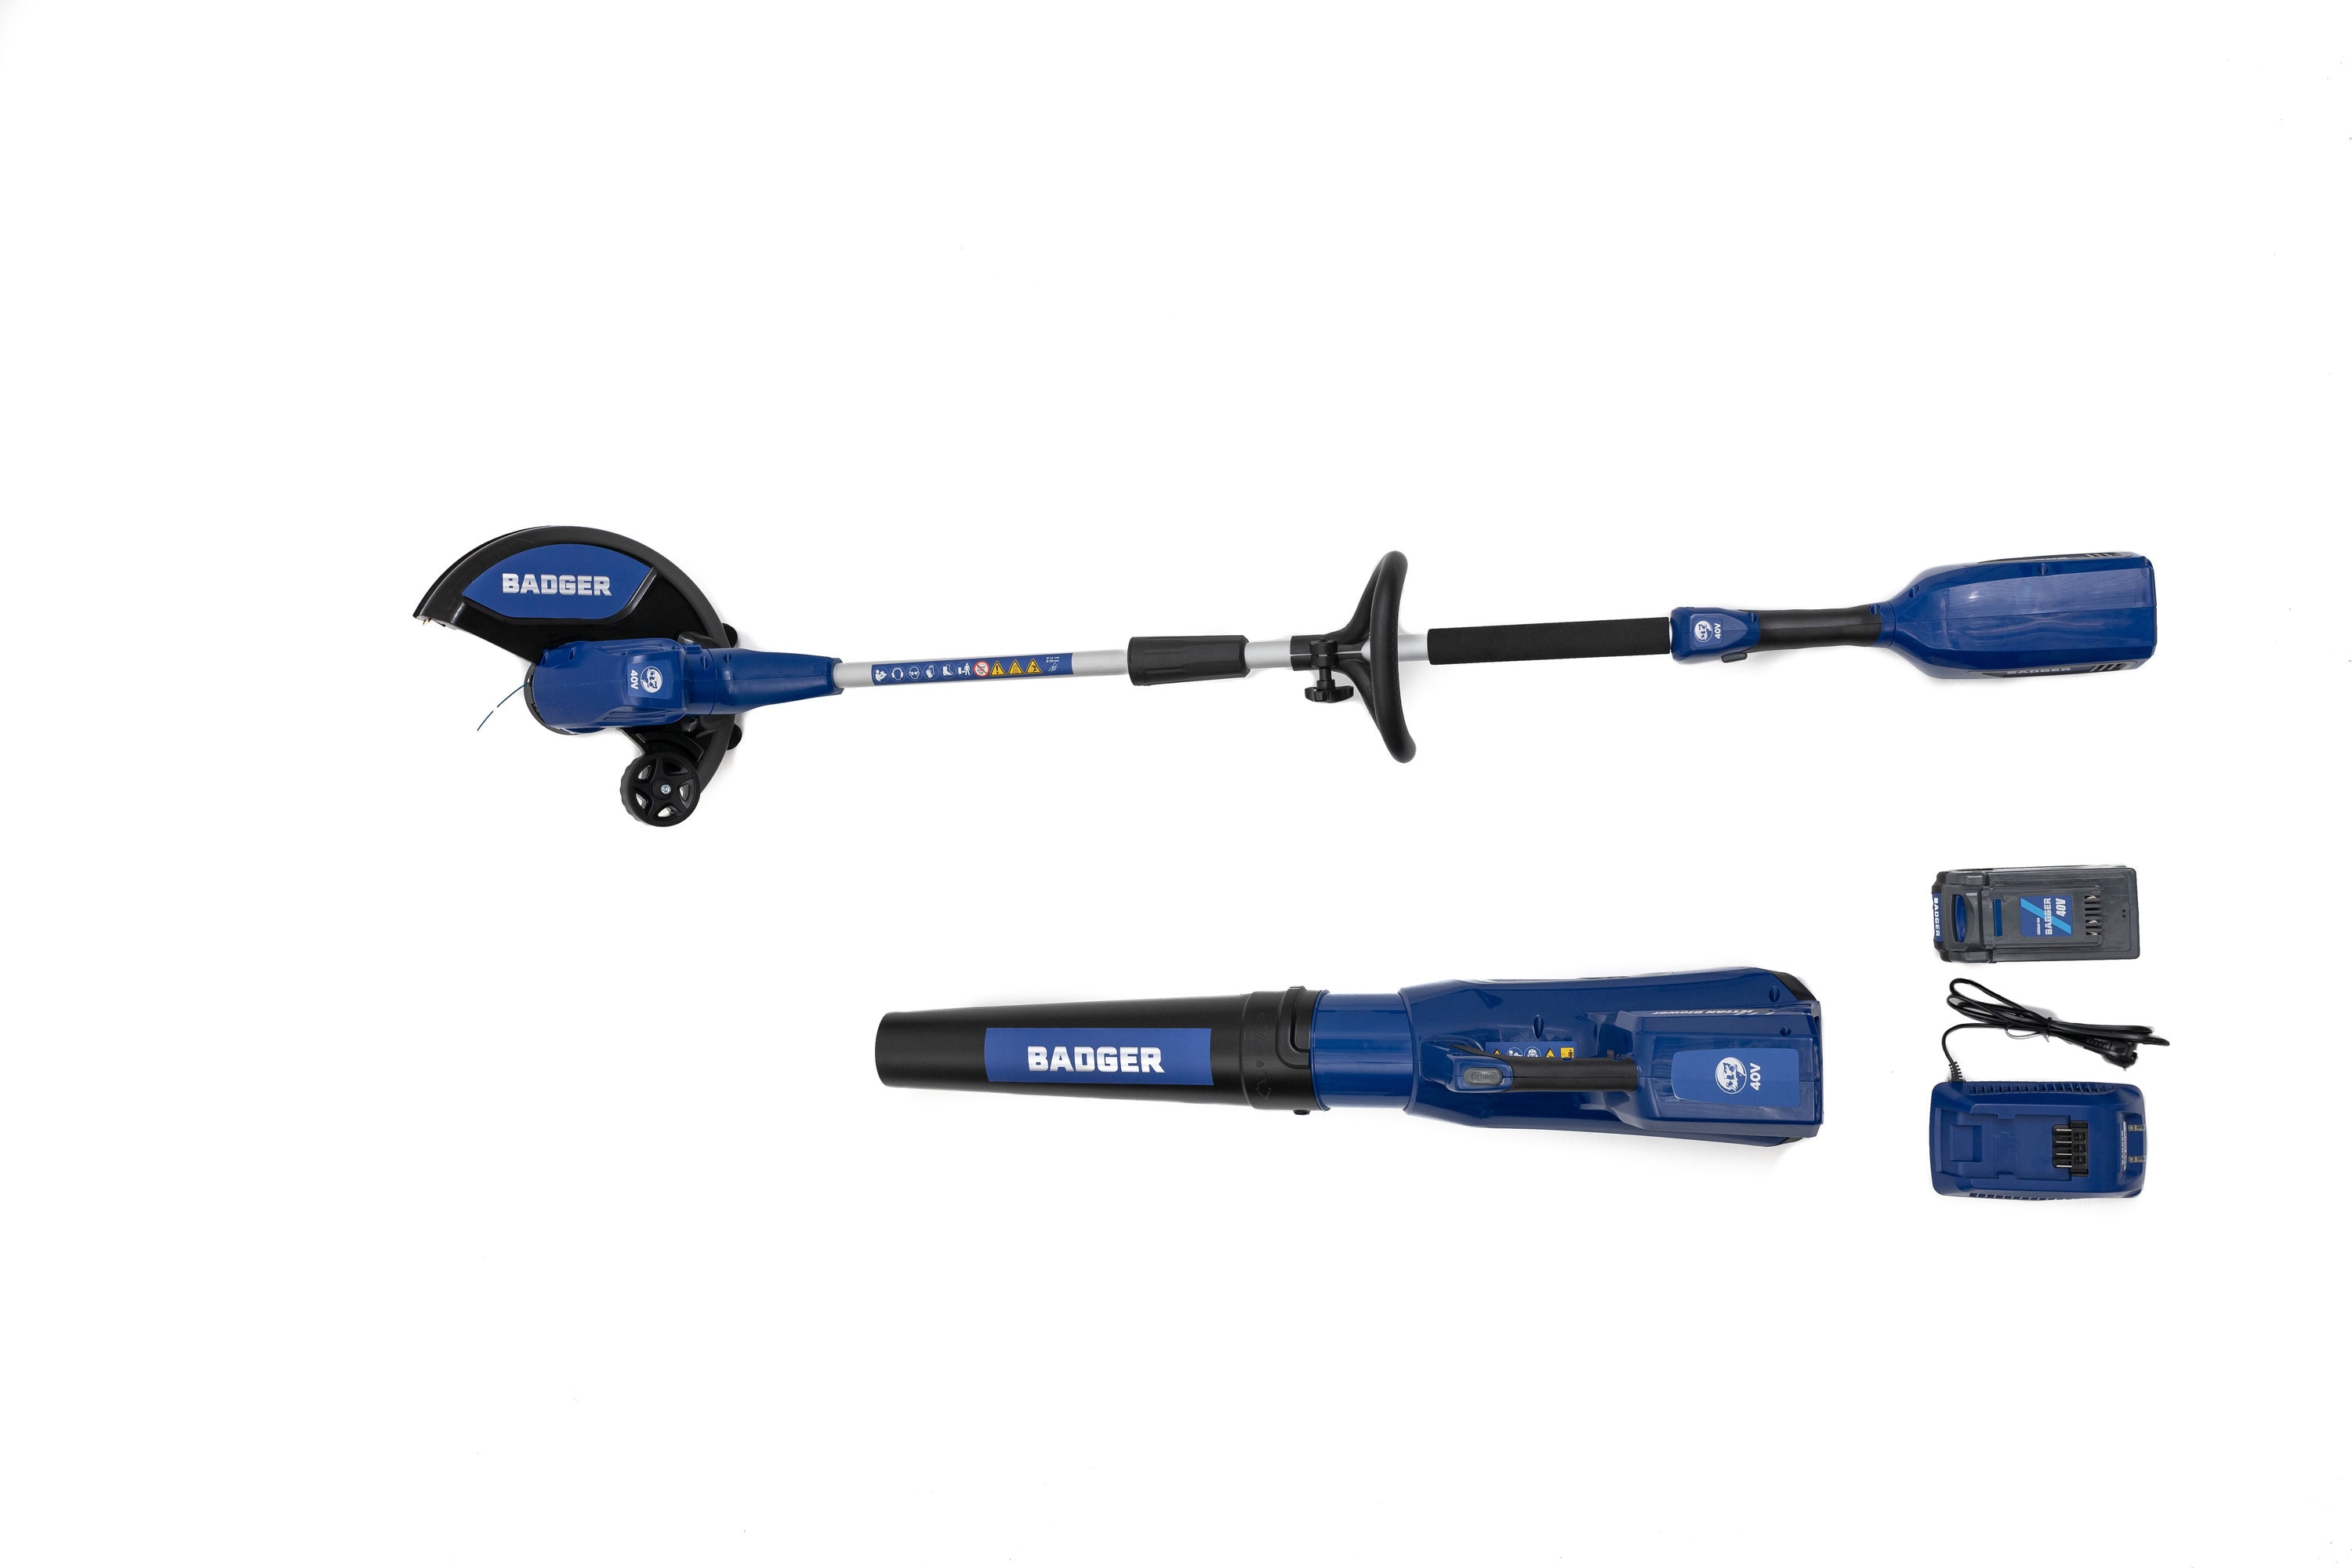 Badger 40-Volt Max Lithium-Ion 4-Piece 40-volt Max Cordless Power Equipment Combo Kit on Sale At Lowe's